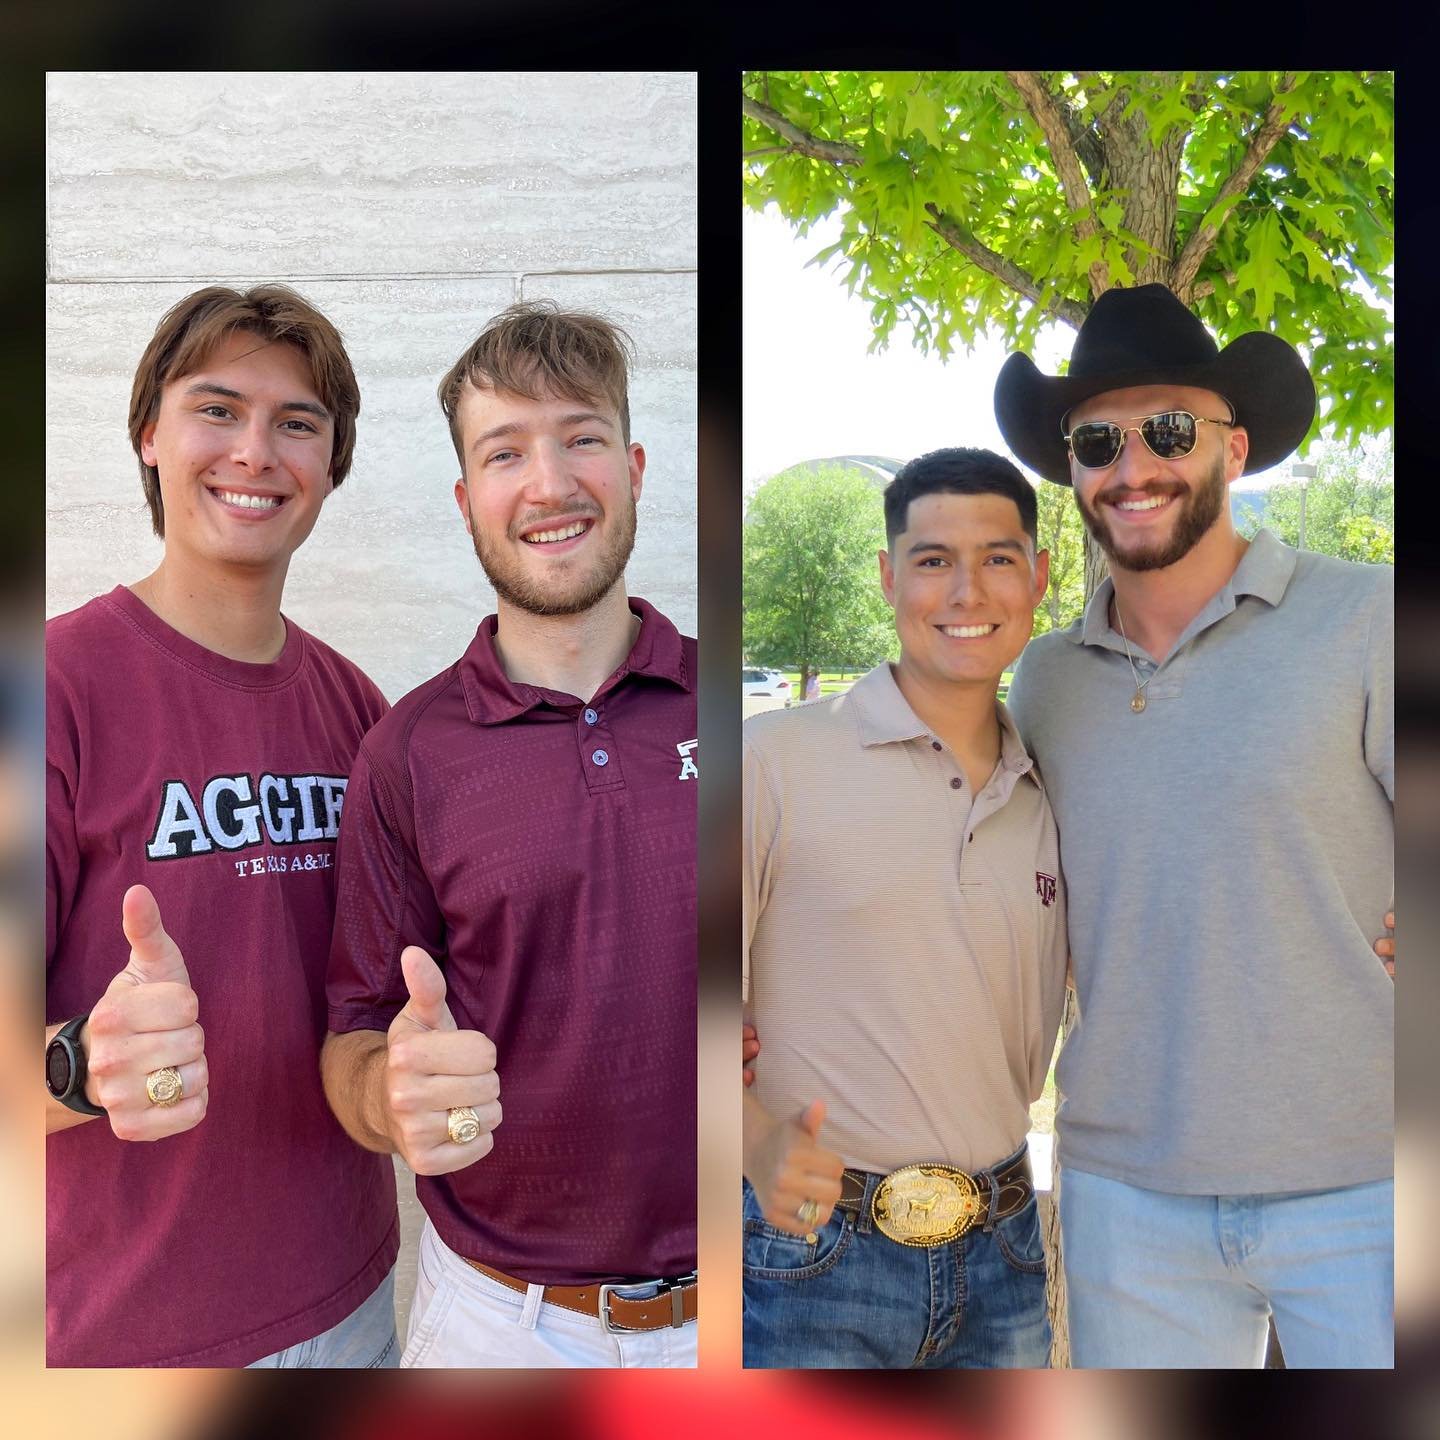 We&rsquo;re thrilled to celebrate our members earning their Aggie rings! Congratulations! 🎉💍 #aggieringday #btho90hours